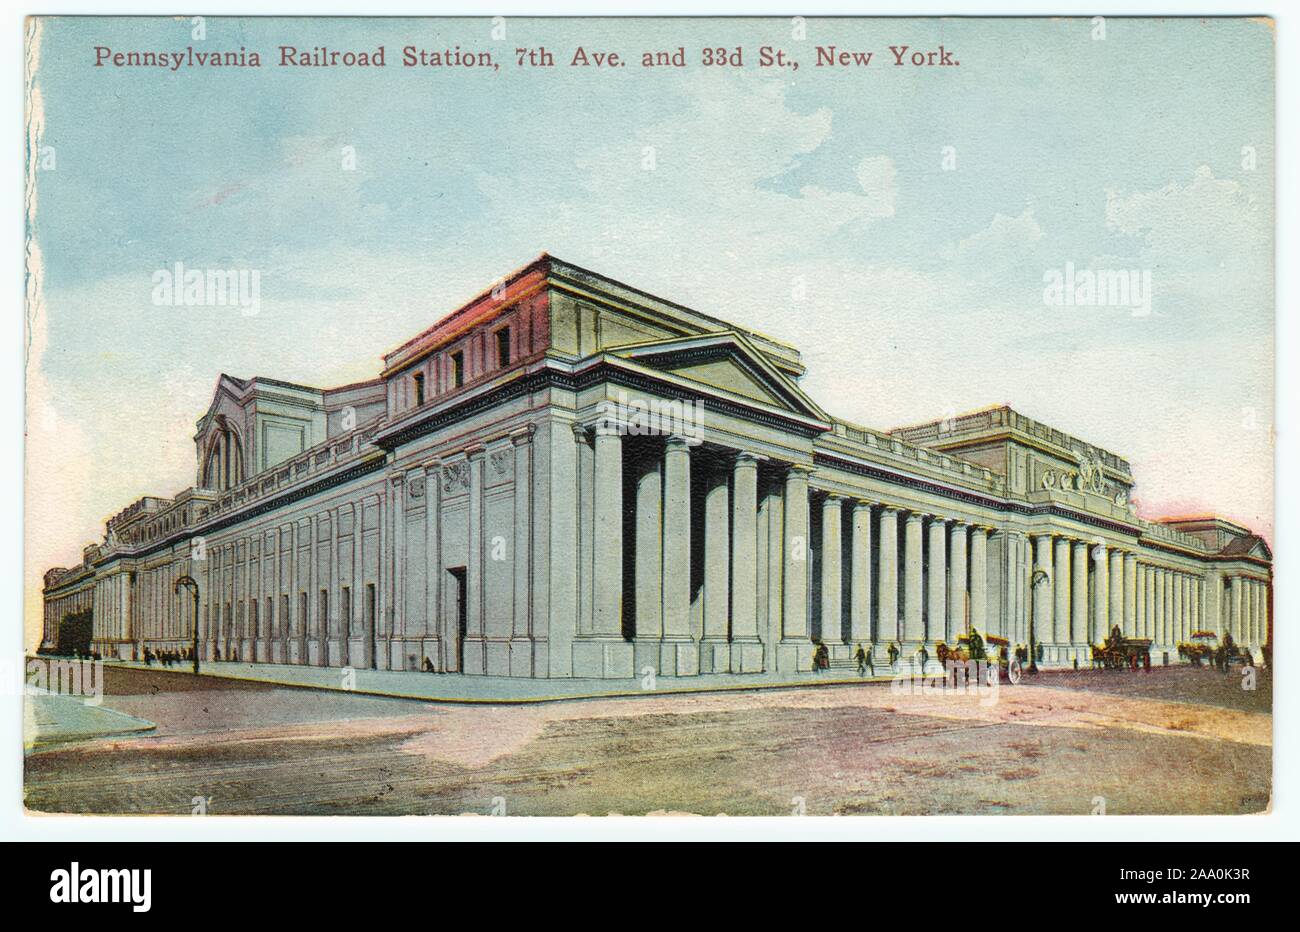 Illustrated postcard of the exterior of Pennsylvania Railroad Station on the corner of 7th Avenue and 33rd Street, New York City, published by Success Postal Card Co, 1918. From the New York Public Library. () Stock Photo